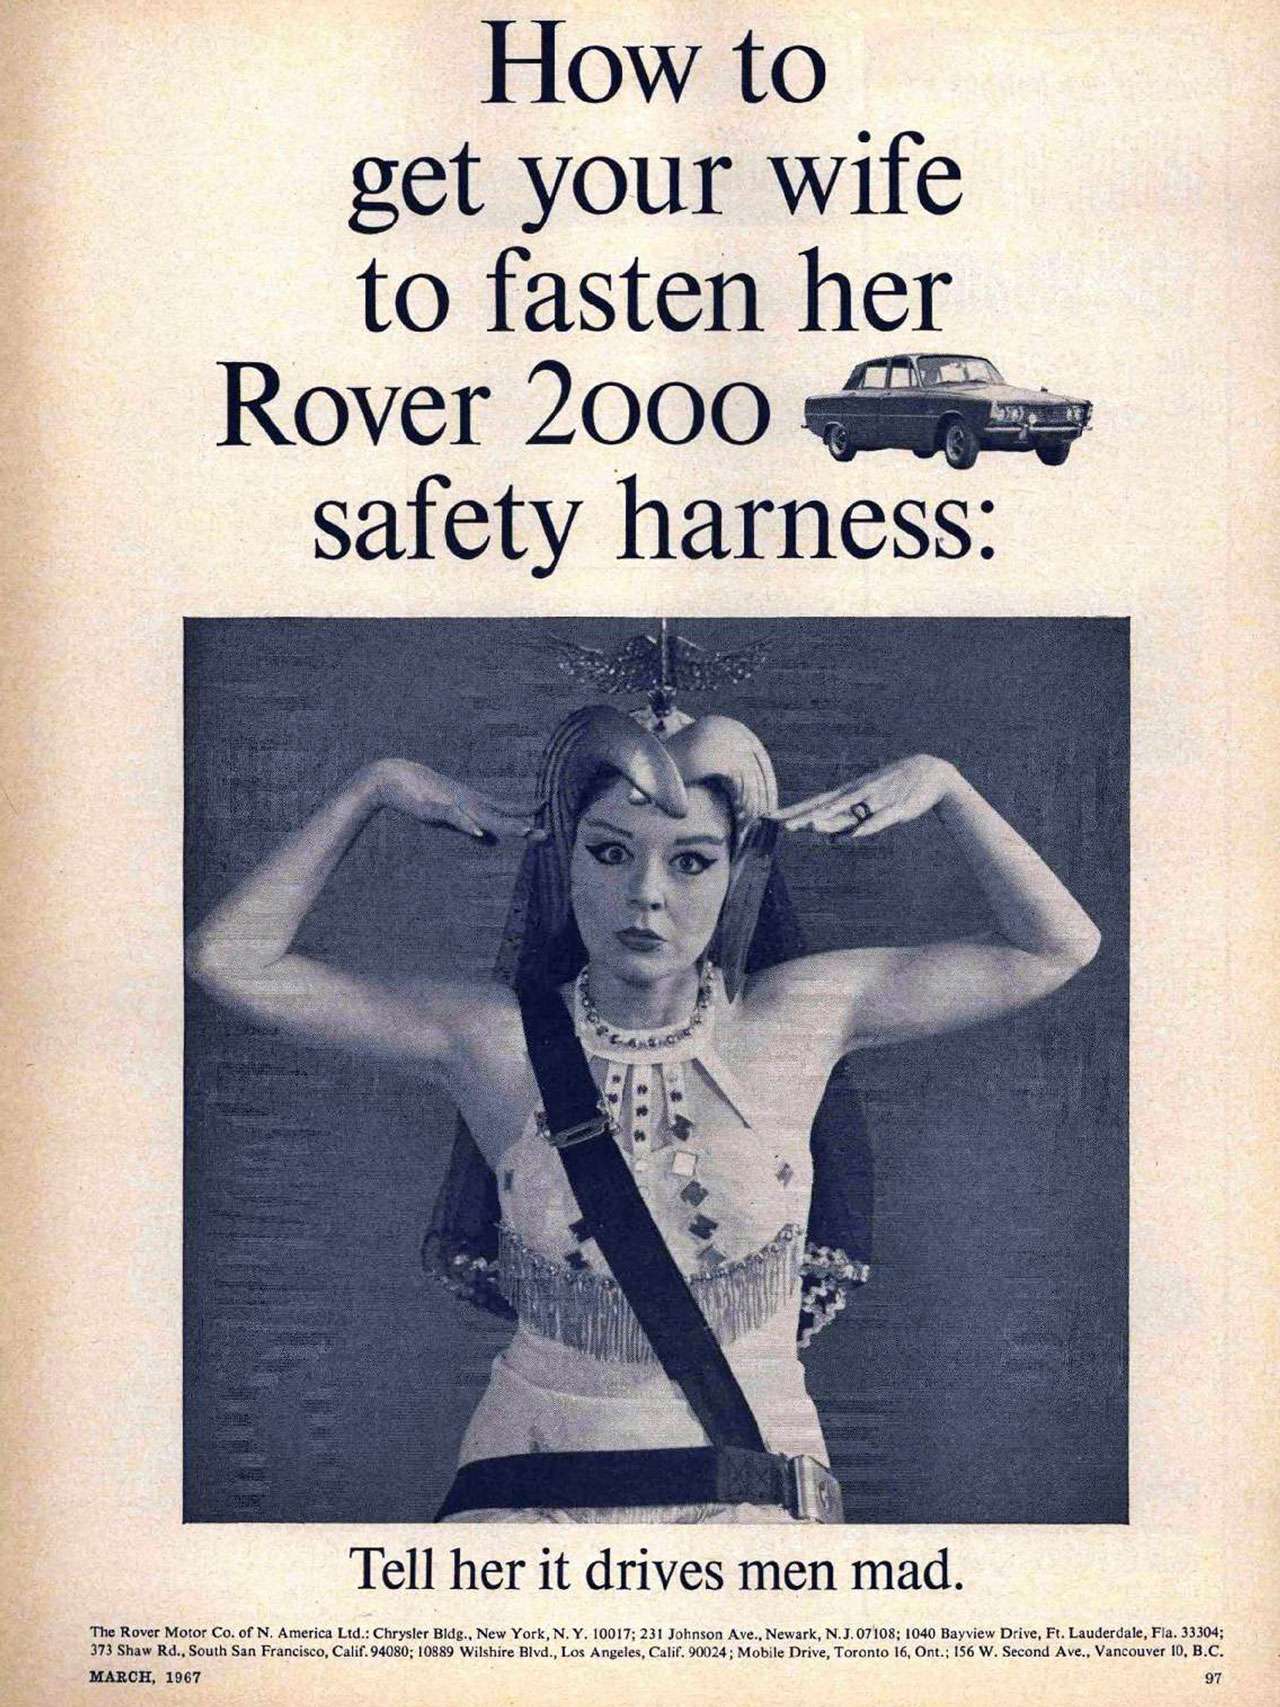 How to get your wife to fasten her Rover 2000 safety harness: tell her it drives men mad.